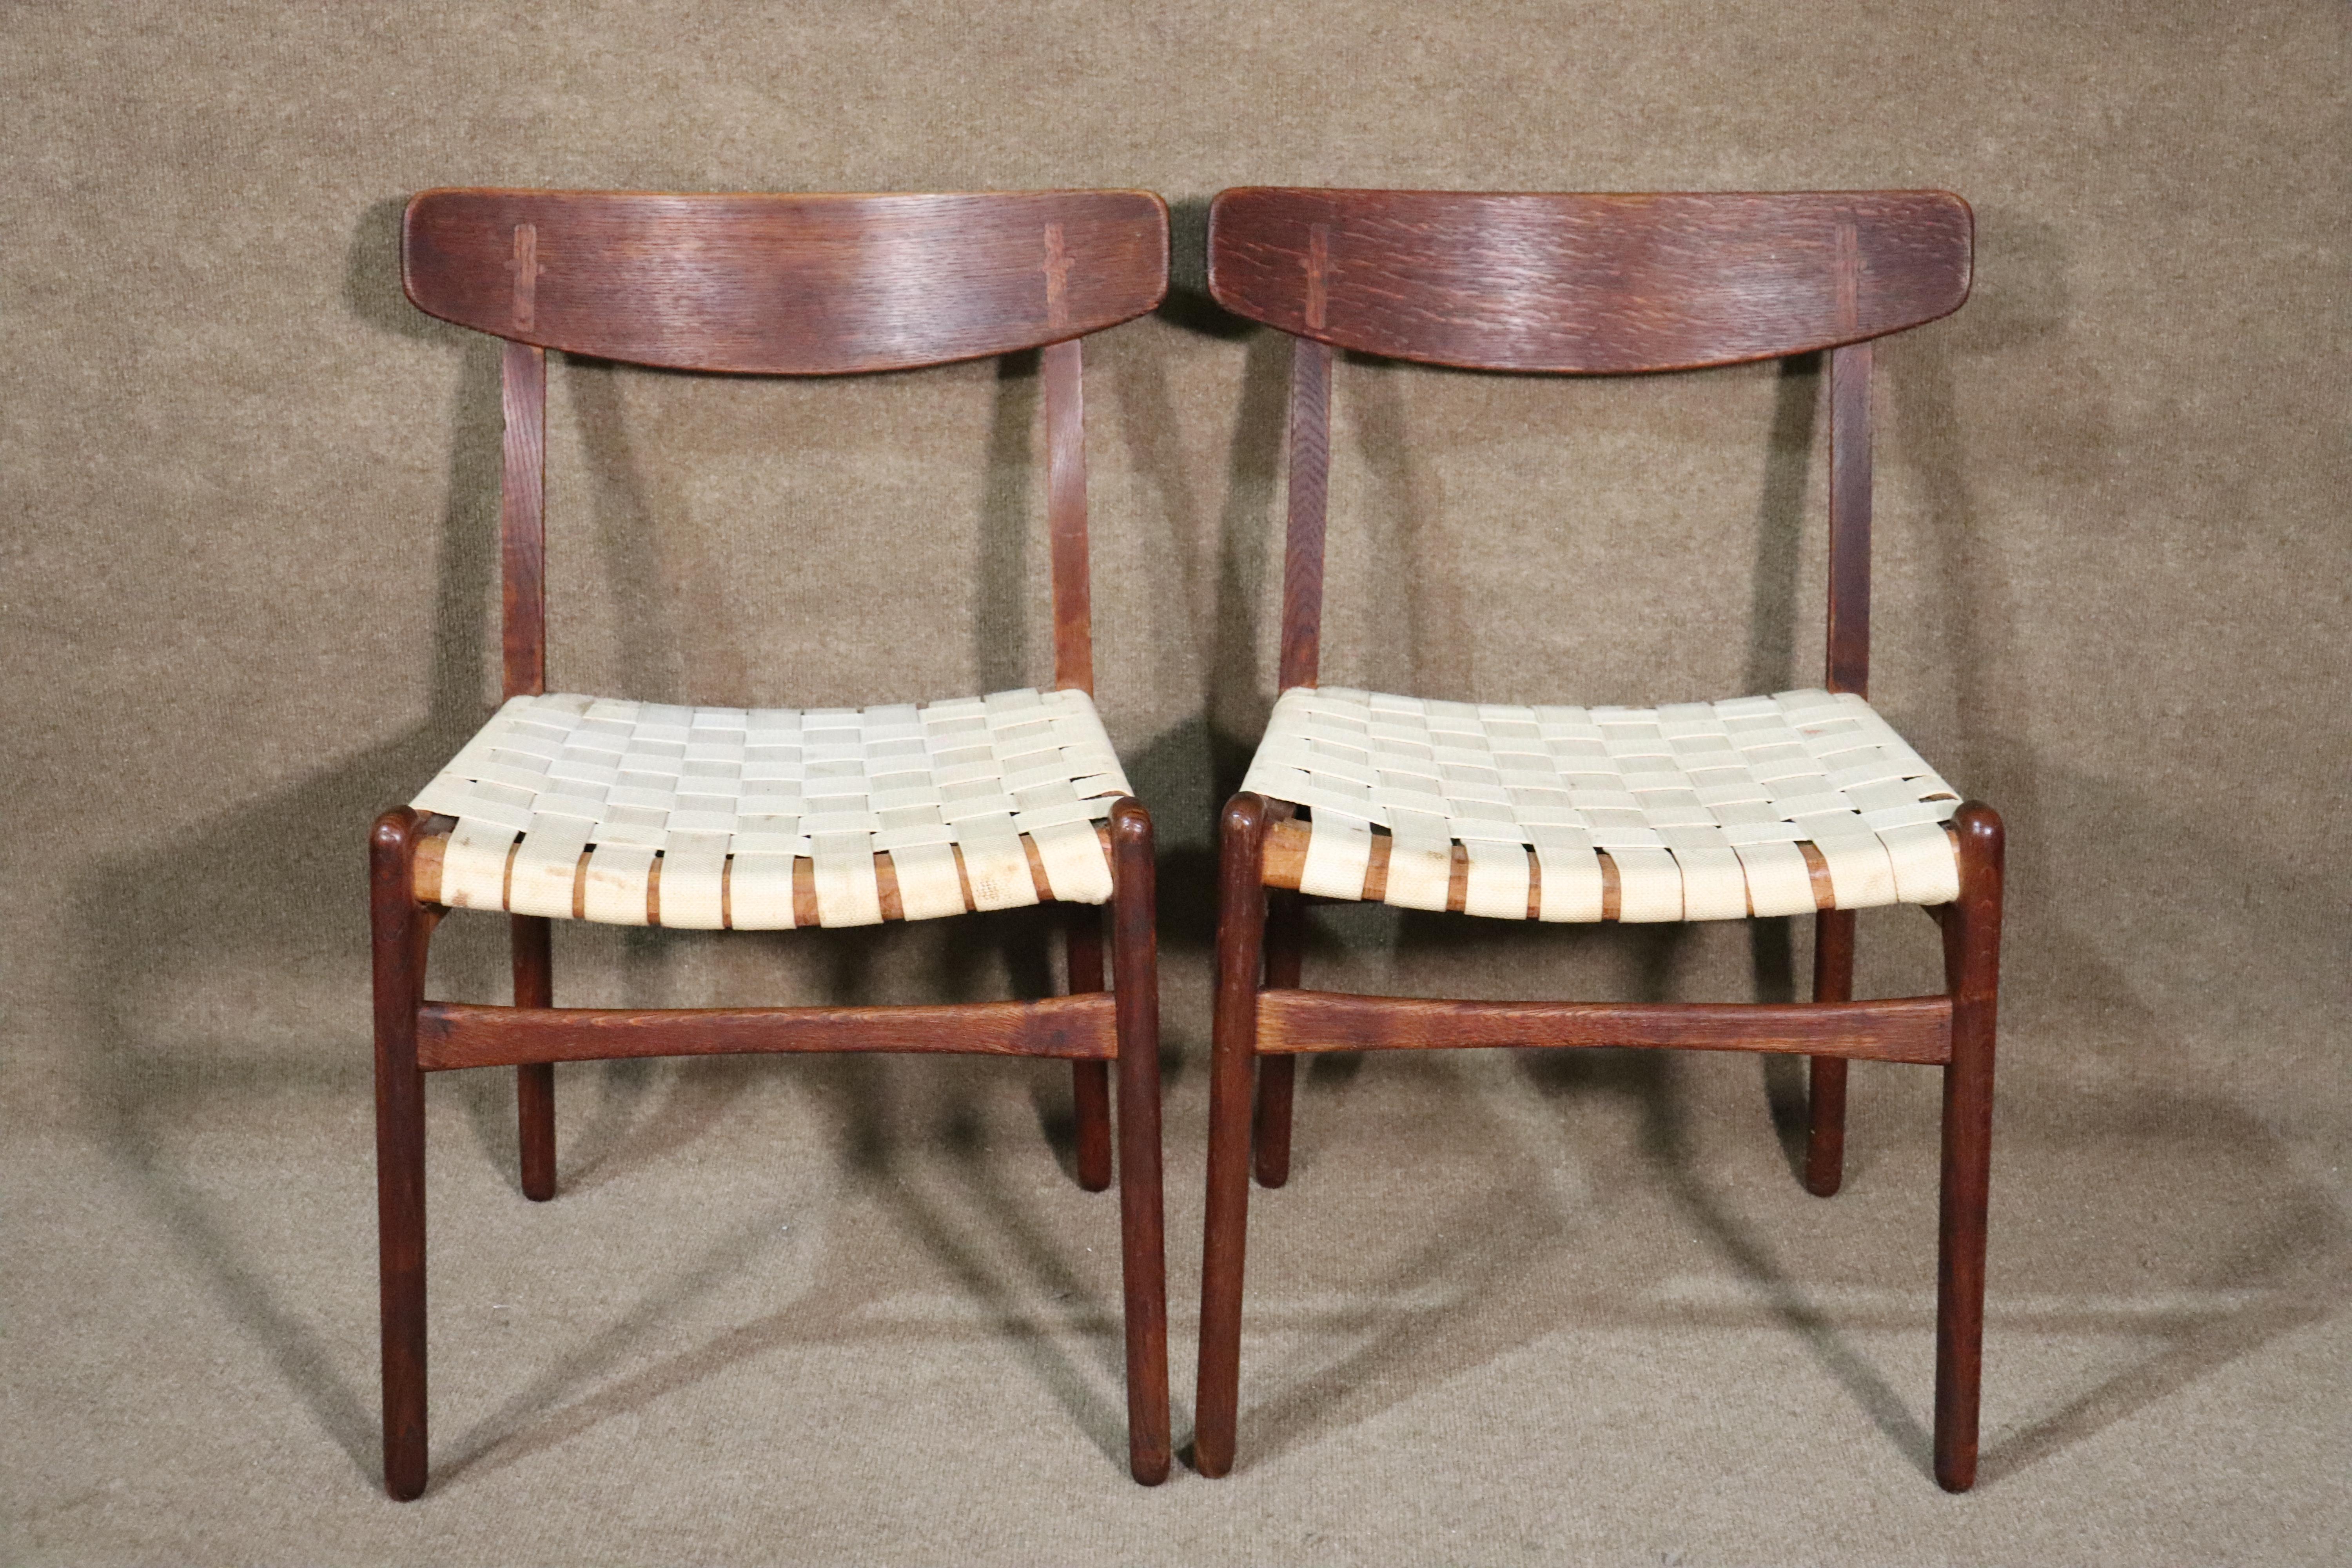 Set of four dining chairs designed by Hans Wegner. Iconic mid-century modern design with webbed seating and inlay cross on seat backs.
Please confirm location.